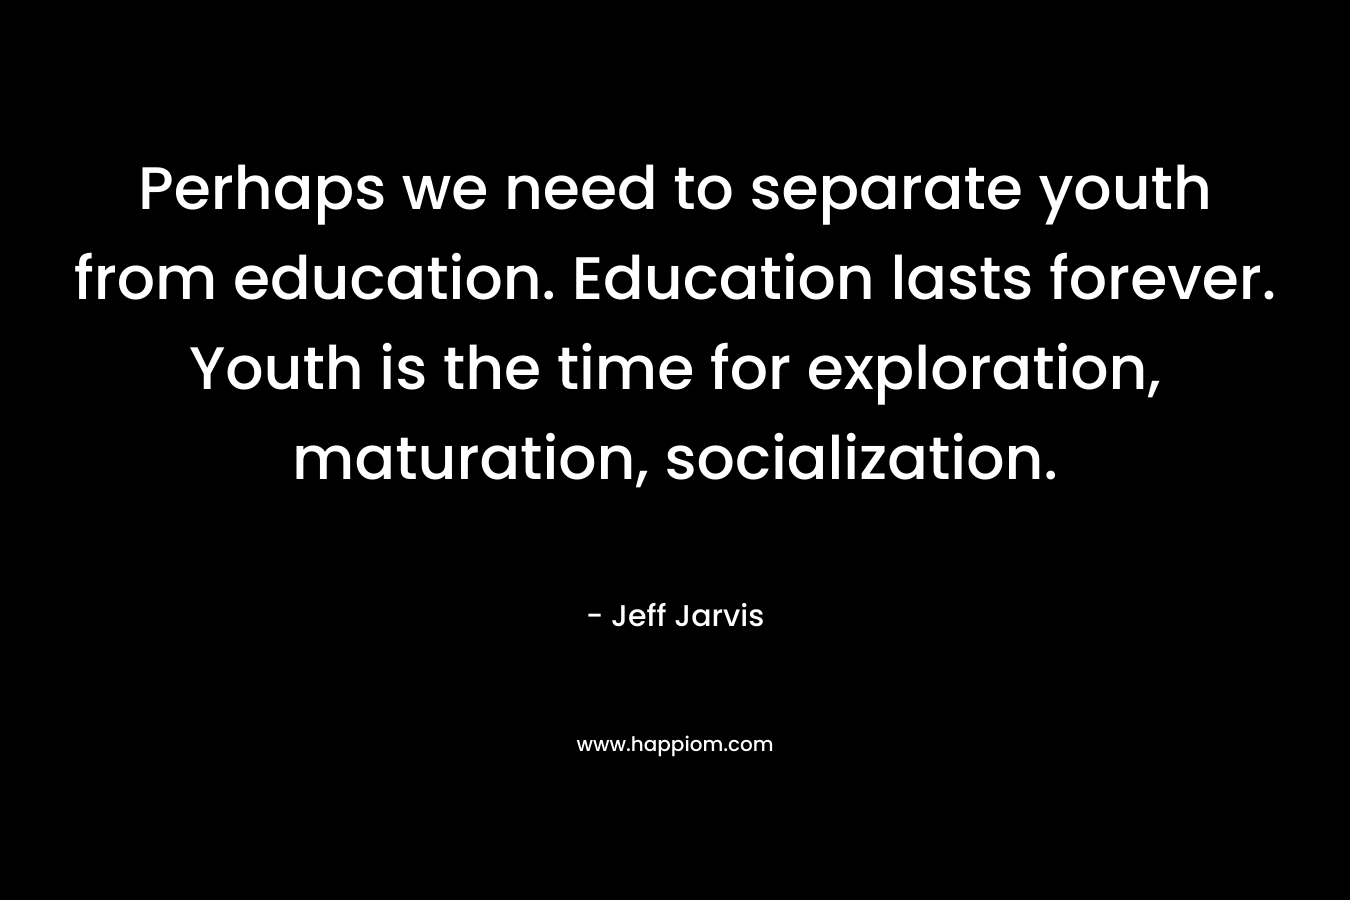 Perhaps we need to separate youth from education. Education lasts forever. Youth is the time for exploration, maturation, socialization.